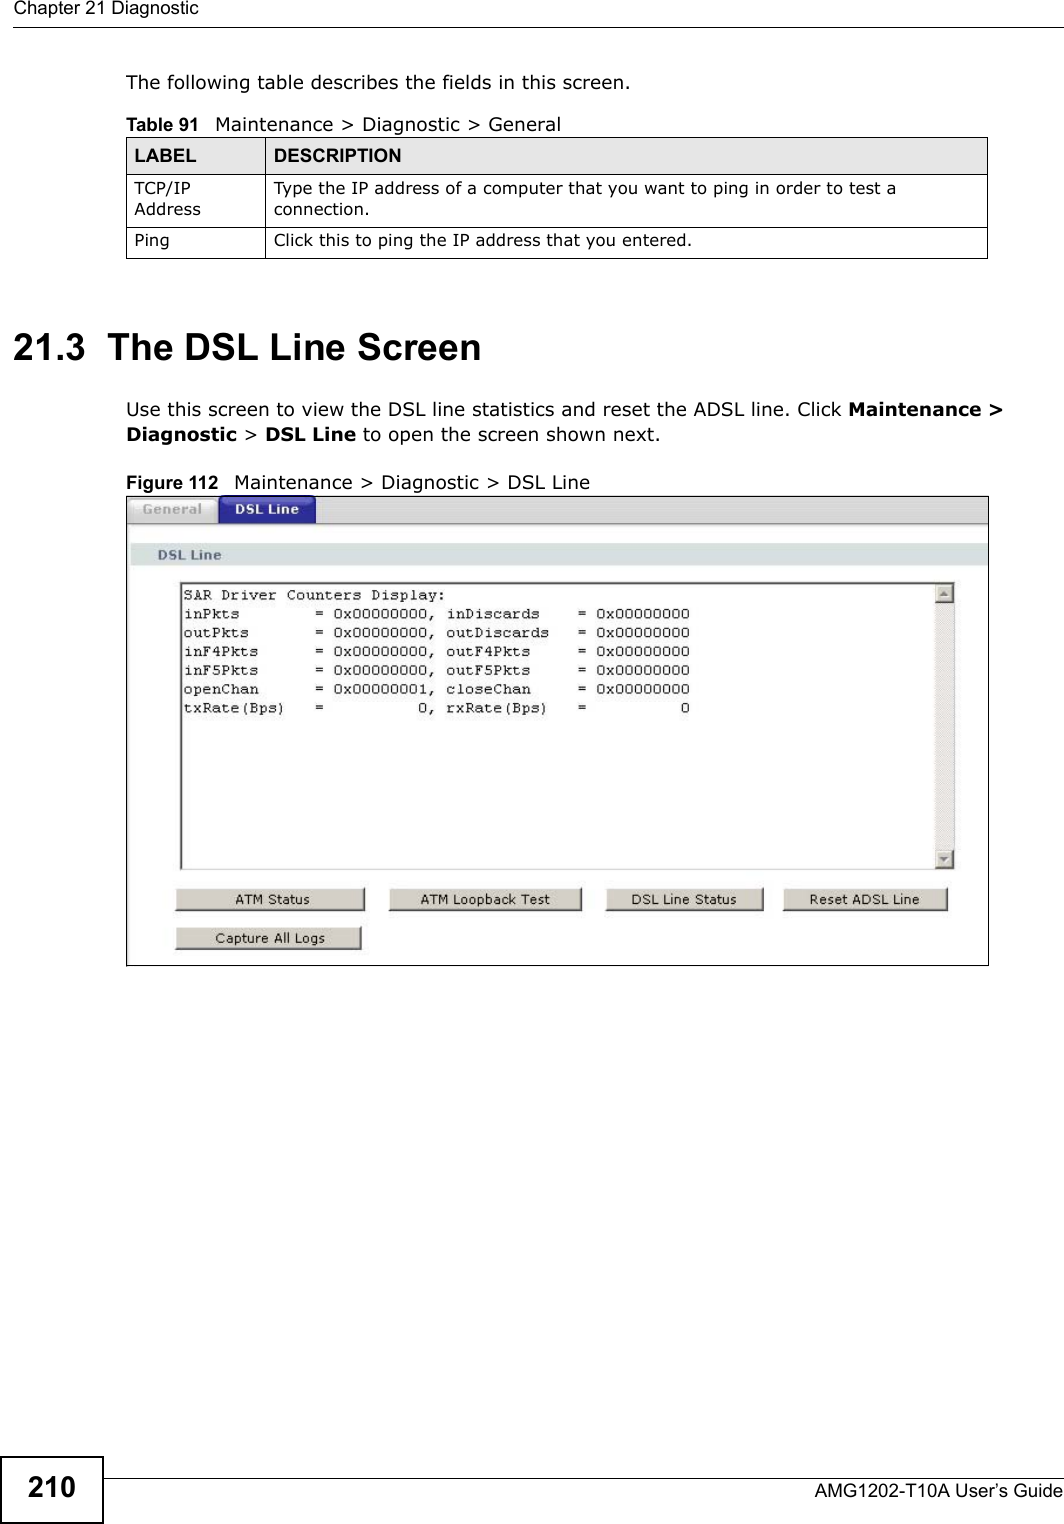 Chapter 21 DiagnosticAMG1202-T10A User’s Guide210The following table describes the fields in this screen. 21.3  The DSL Line Screen Use this screen to view the DSL line statistics and reset the ADSL line. Click Maintenance &gt; Diagnostic &gt; DSL Line to open the screen shown next.Figure 112   Maintenance &gt; Diagnostic &gt; DSL LineTable 91   Maintenance &gt; Diagnostic &gt; GeneralLABEL DESCRIPTIONTCP/IP AddressType the IP address of a computer that you want to ping in order to test a connection.Ping Click this to ping the IP address that you entered.